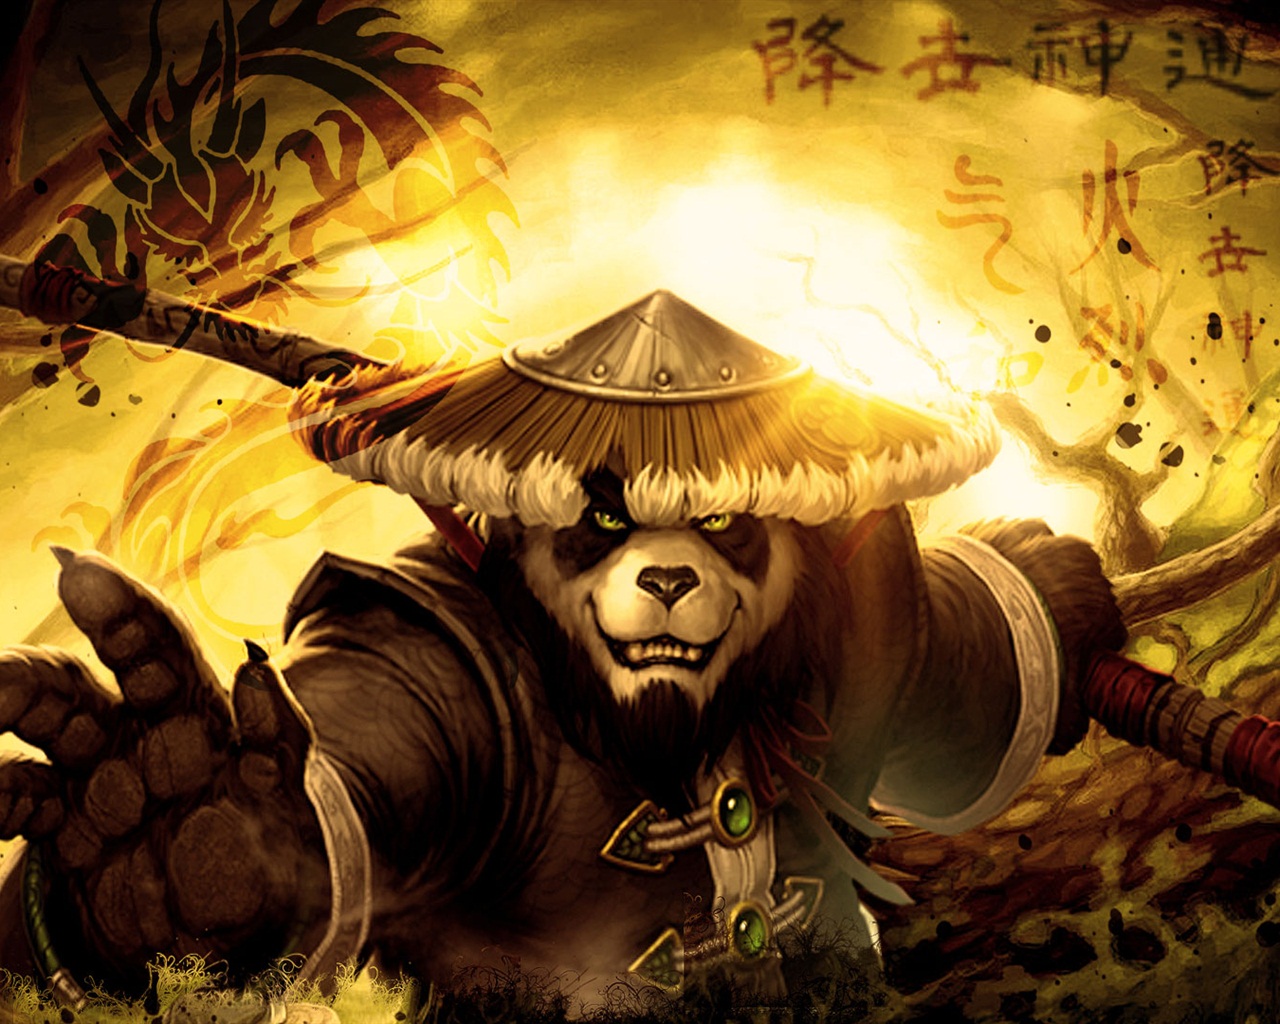 World of Warcraft: Mists of Pandaria HD wallpapers #10 - 1280x1024